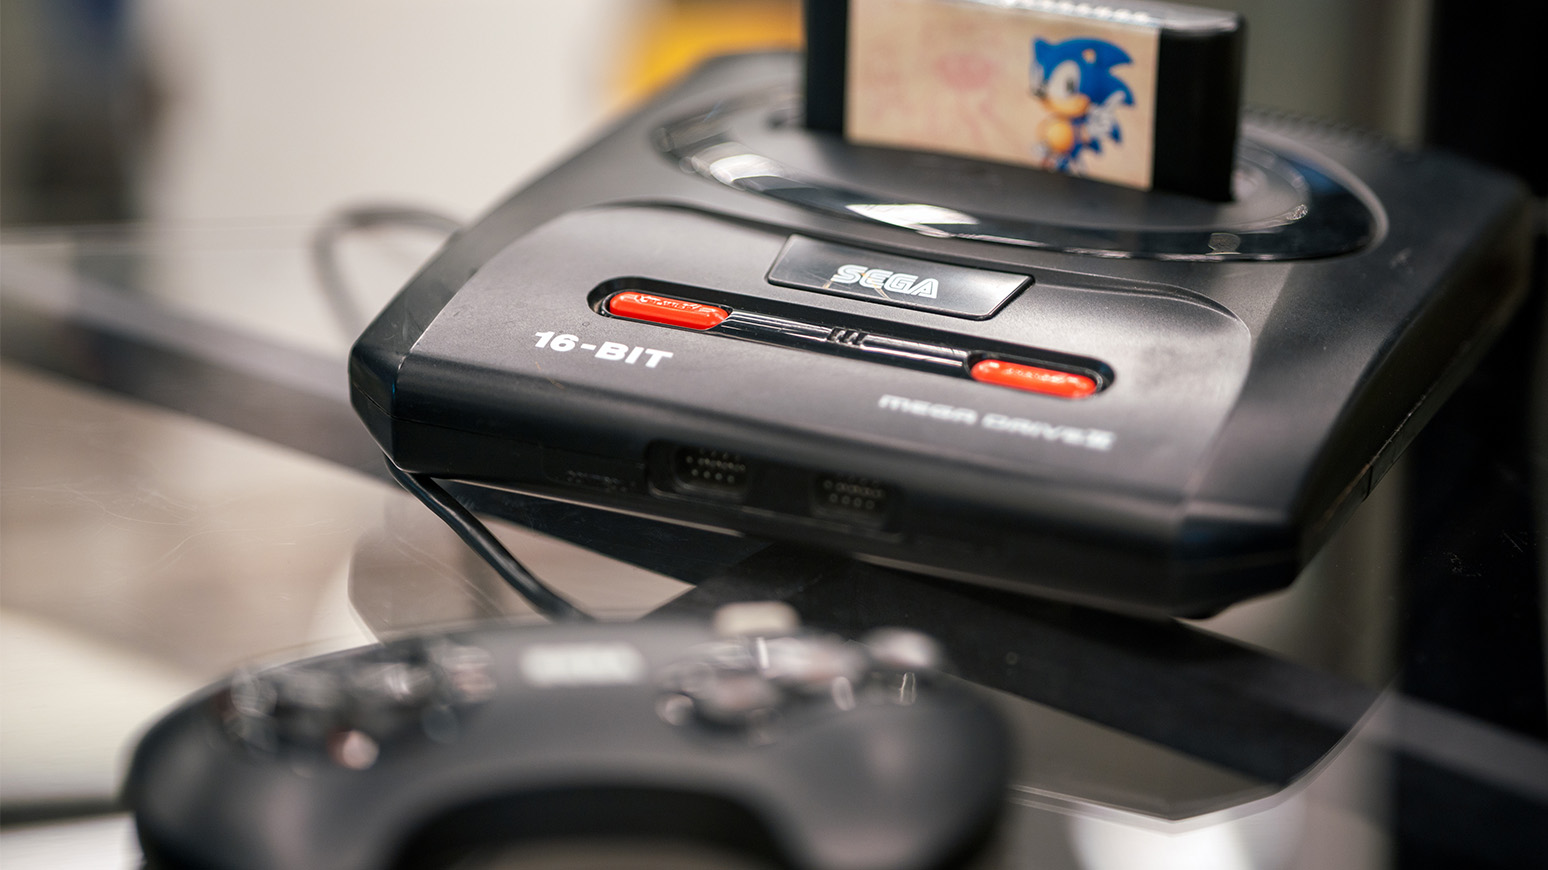 5 Classic Video Game Consoles We Still Want To Play